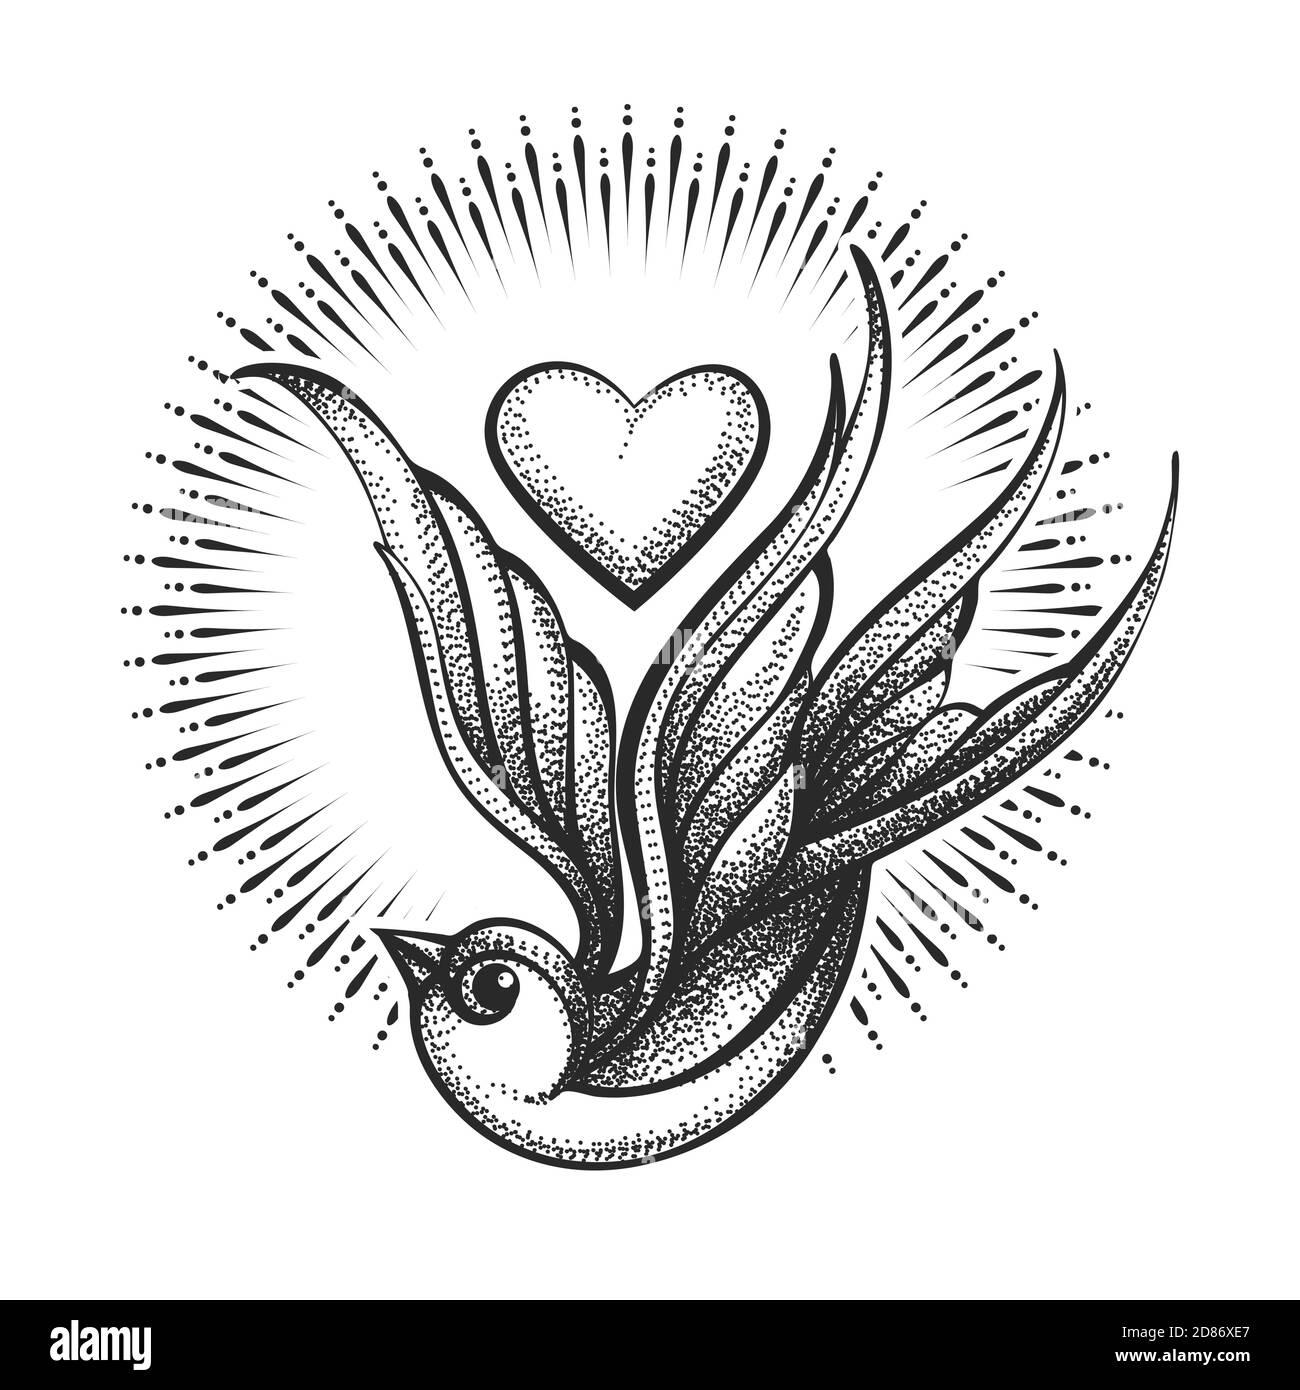 Love Theme Tattoo of Swallow and Heart isolated on white background. Vector illustration. Stock Vector